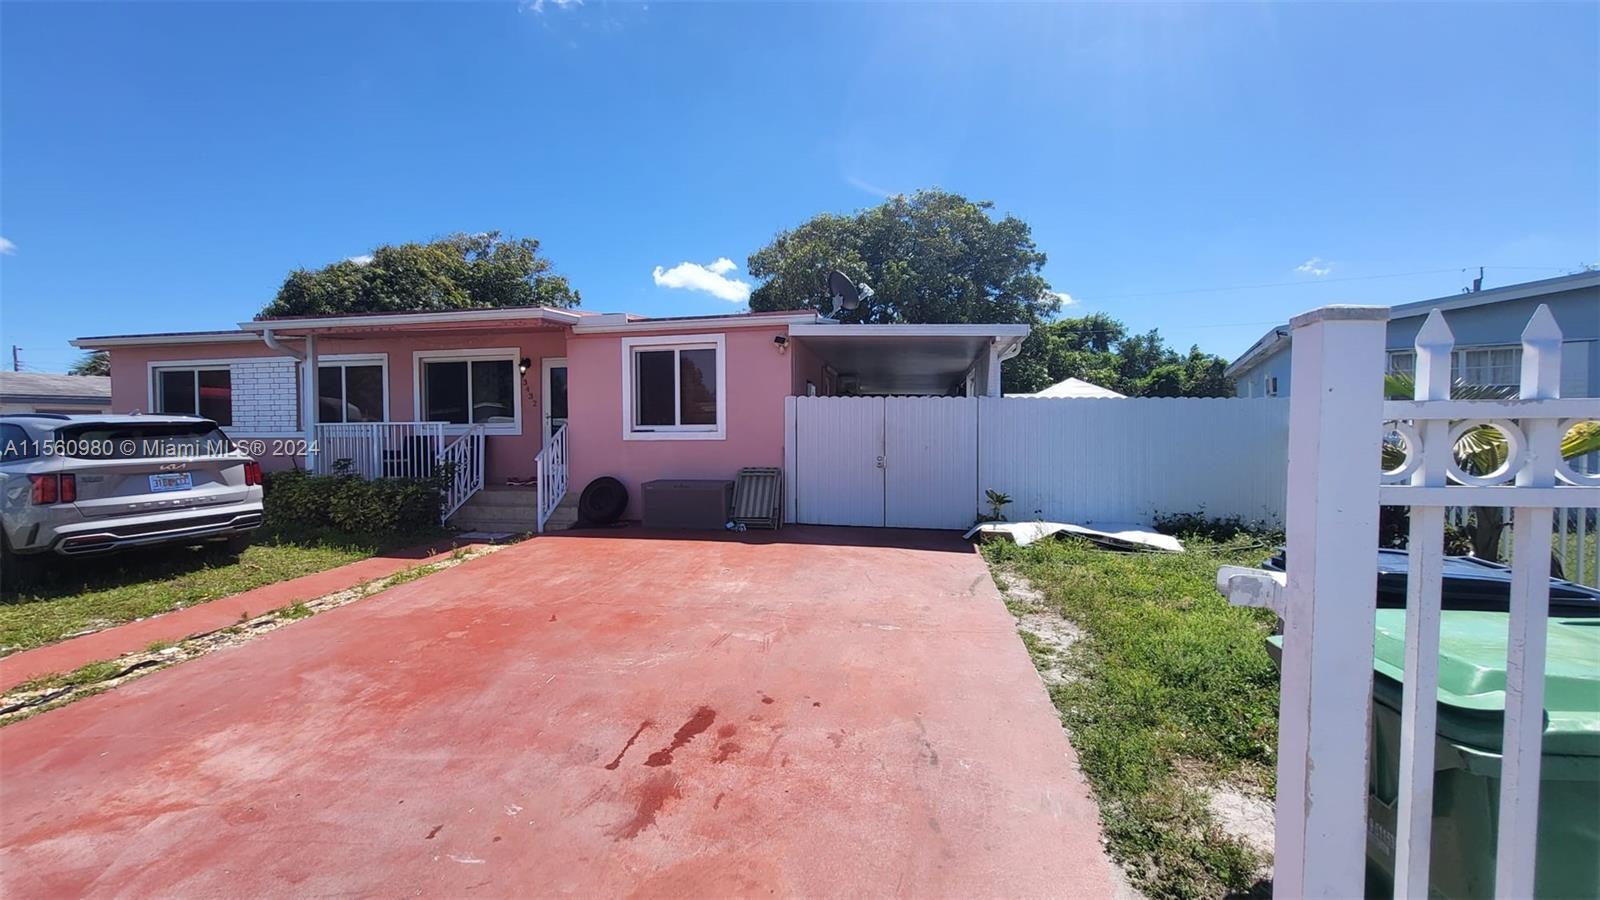 Photo of 3432 NW 176th Ter in Miami Gardens, FL